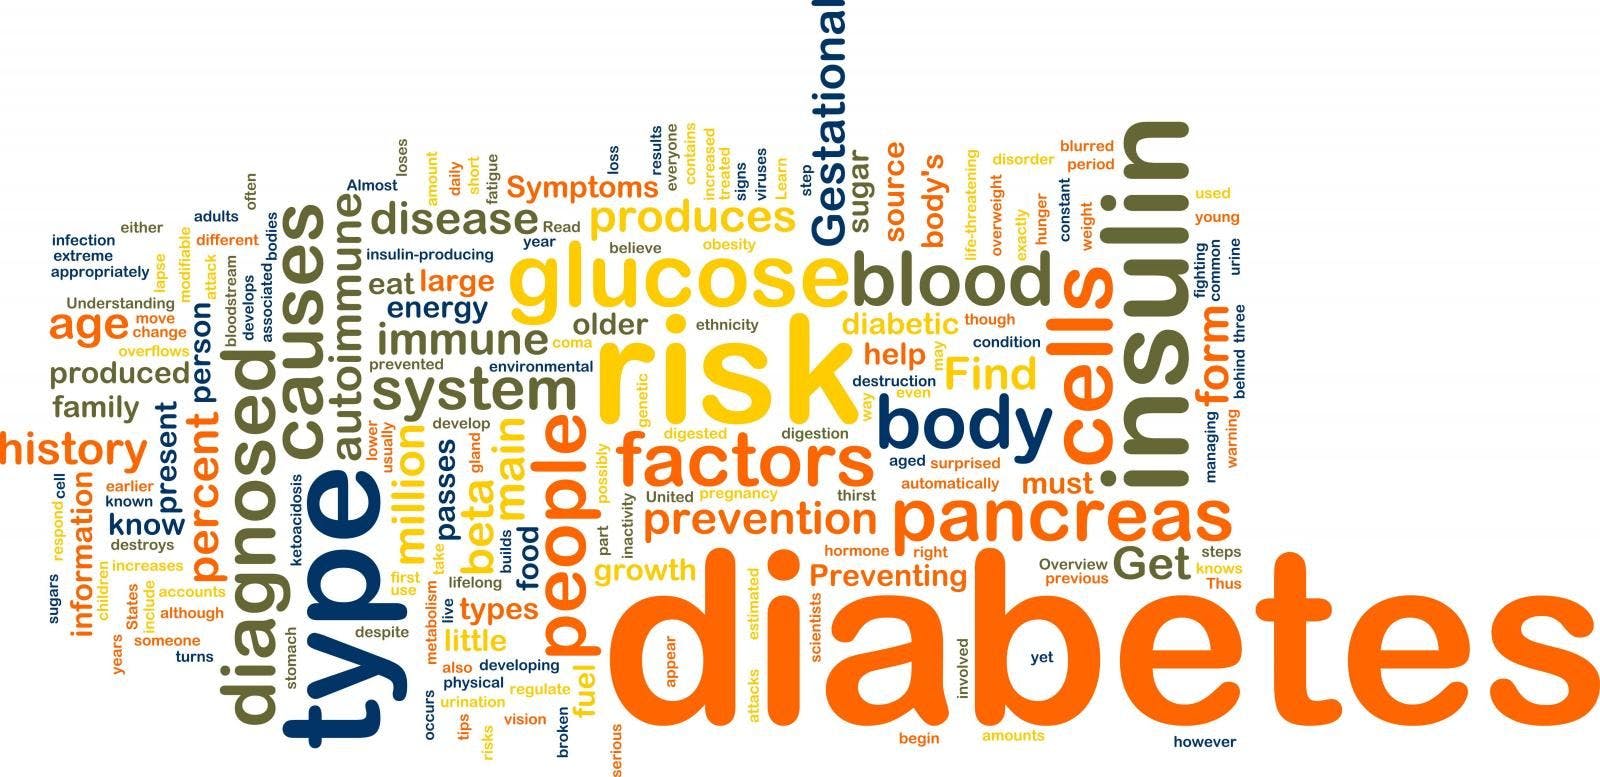 What Are the Best Drugs to Treat Diabetes?